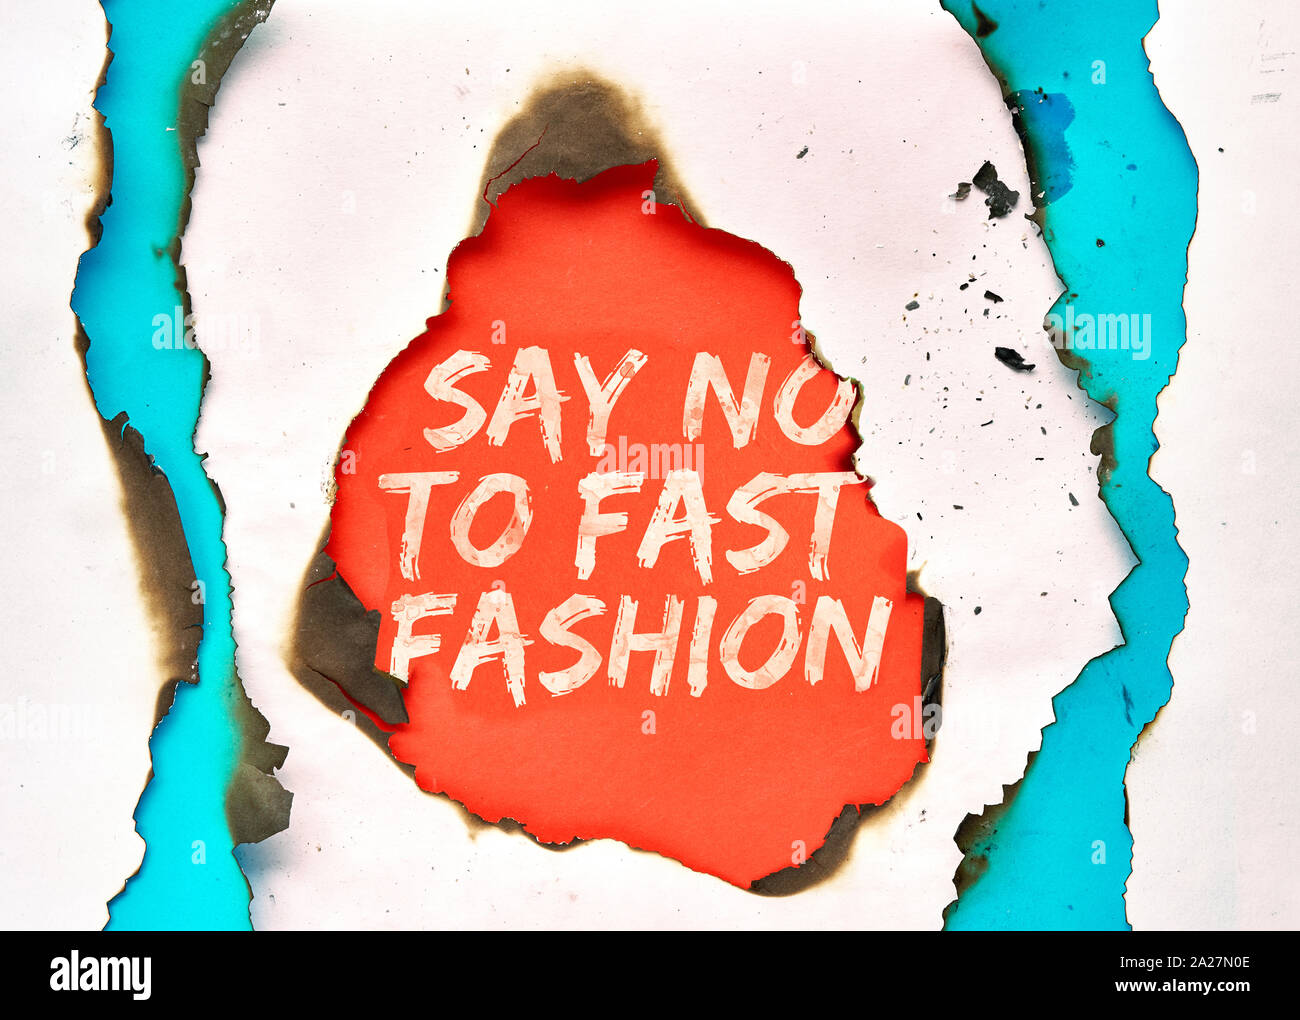 Text 'Say no to fast fashion' in hole burned though white, red and turquoise paper Stock Photo